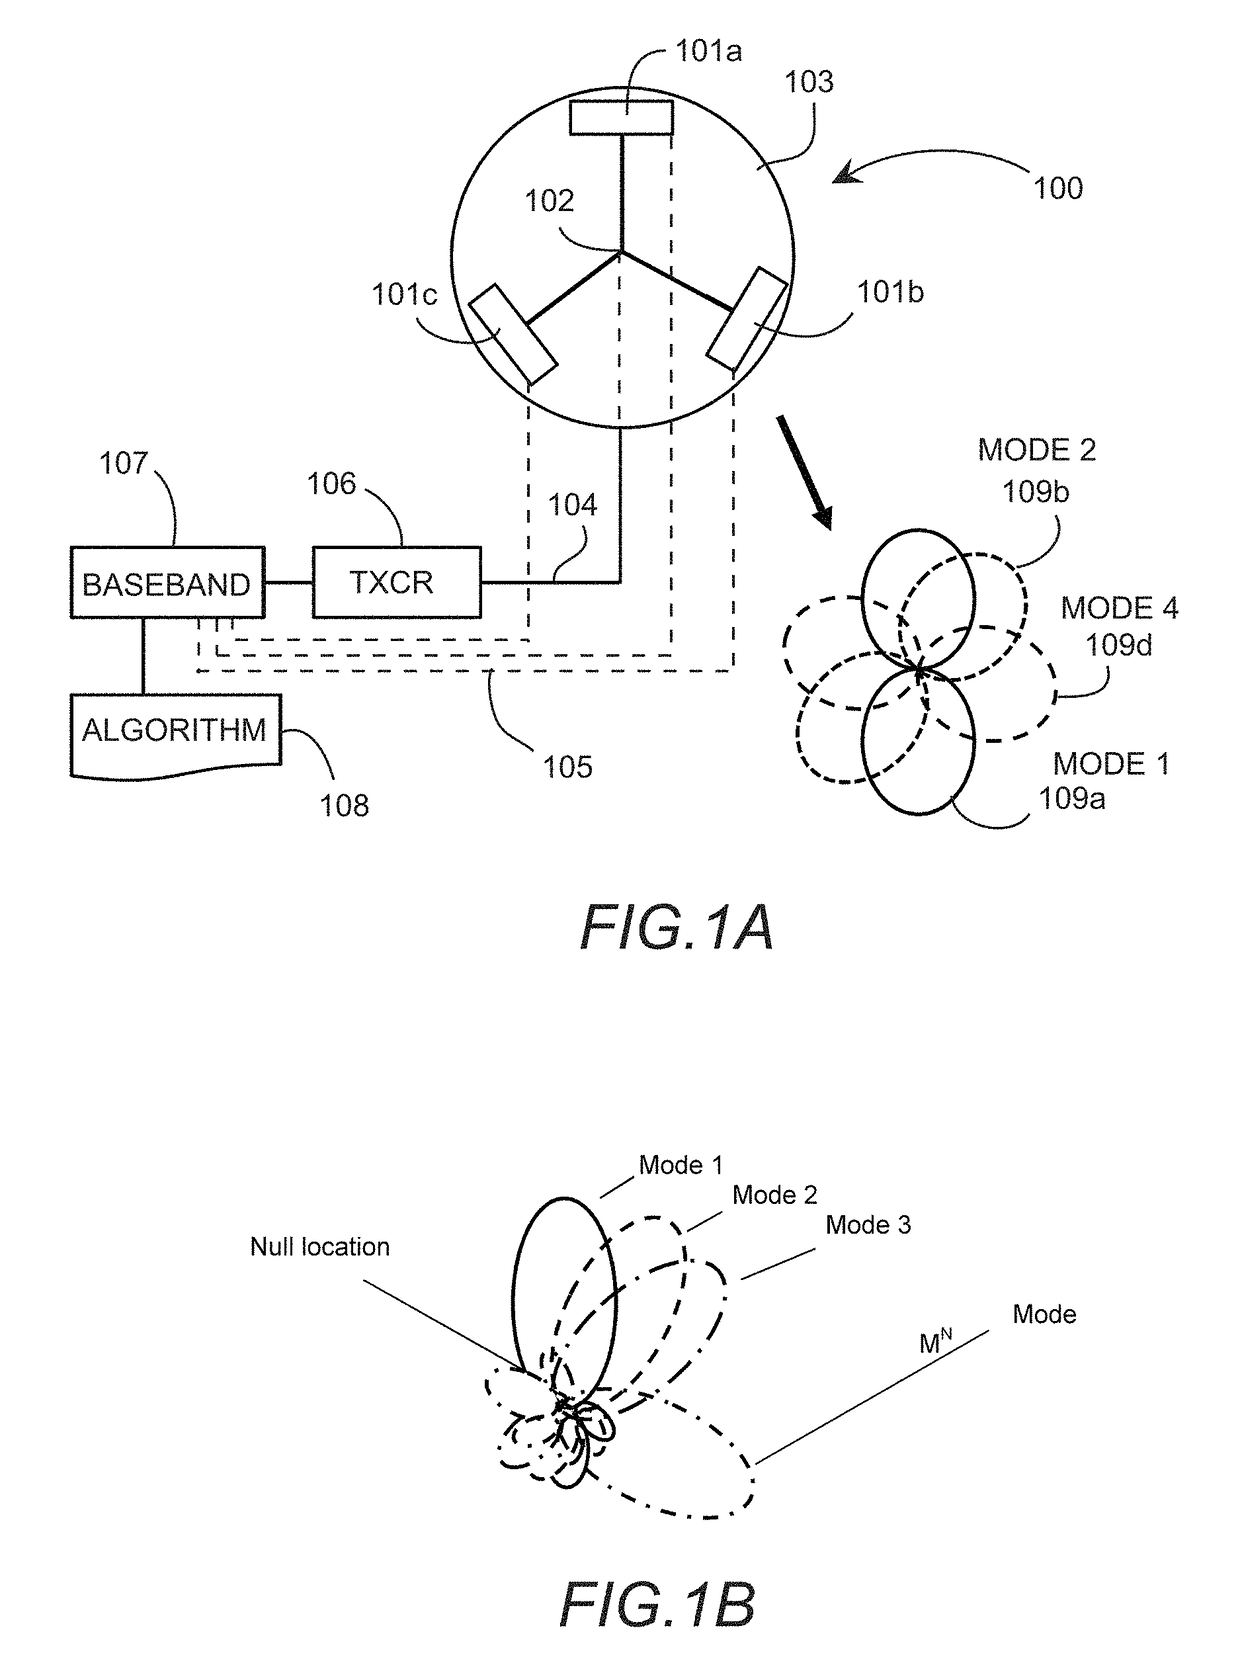 Modal antenna array for interference mitigation